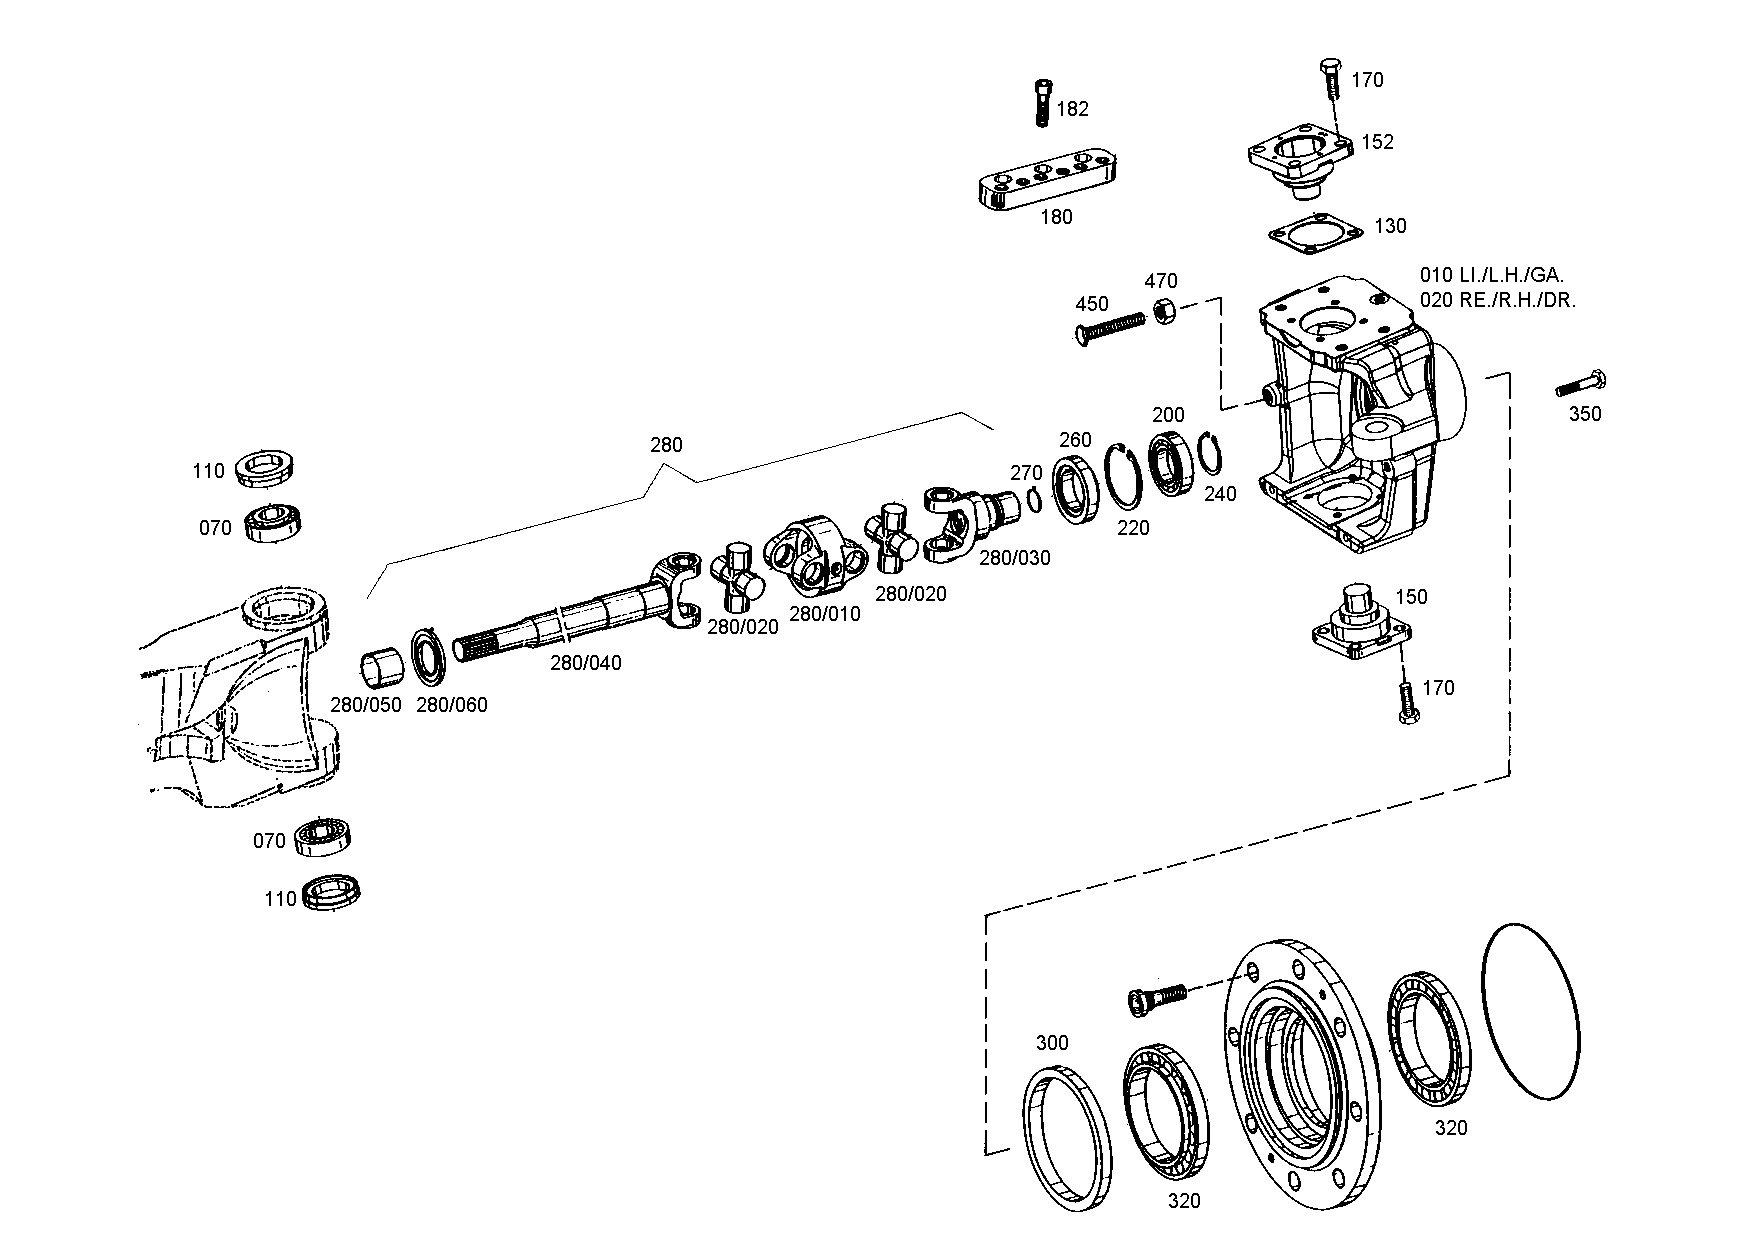 drawing for AGCO F409301020020 - FORK SHAFT (figure 1)